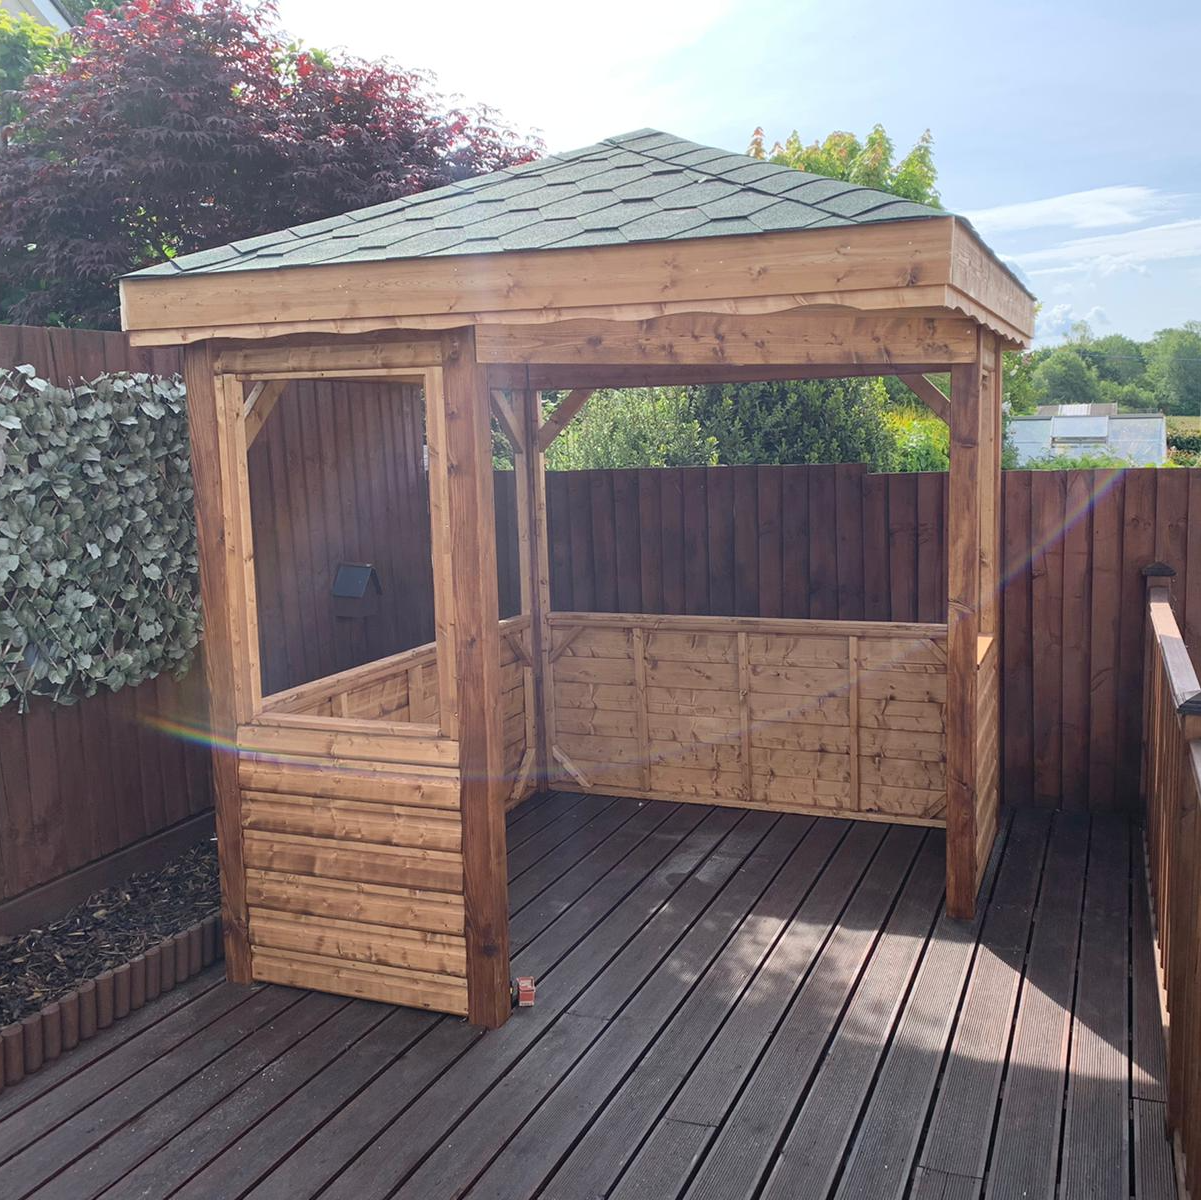 Square gazebo with shingles on roof in design by the customer.